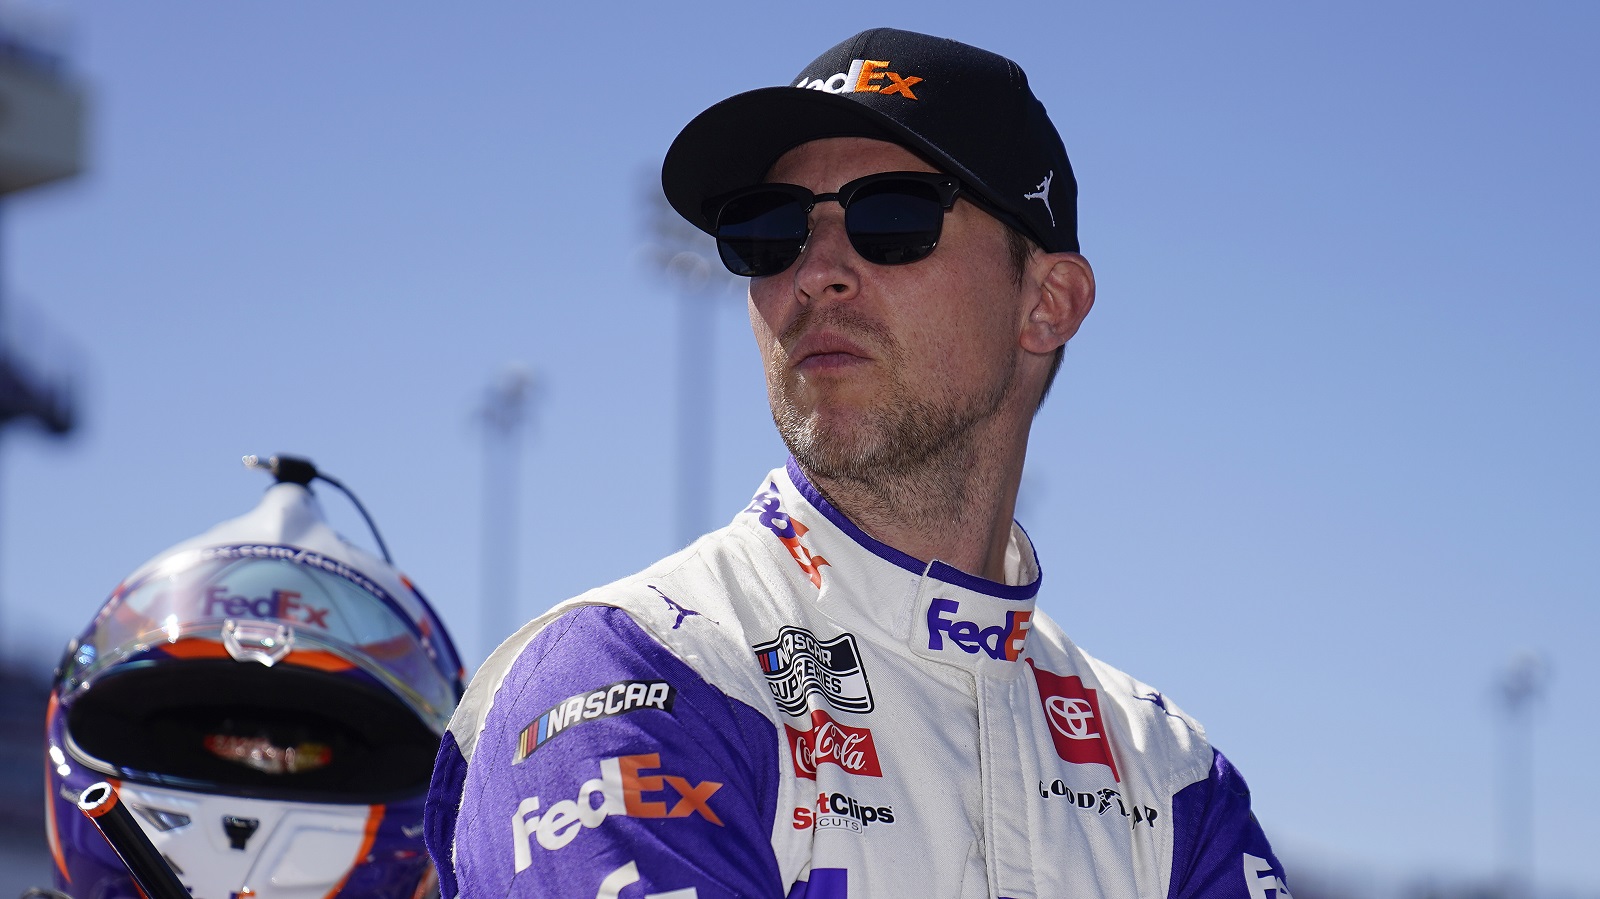 Denny Hamlin looks on during qualifying for the NASCAR Cup Series Toyota Owners 400 at Richmond Raceway on April 2, 2022. | Jacob Kupferman/Getty Images